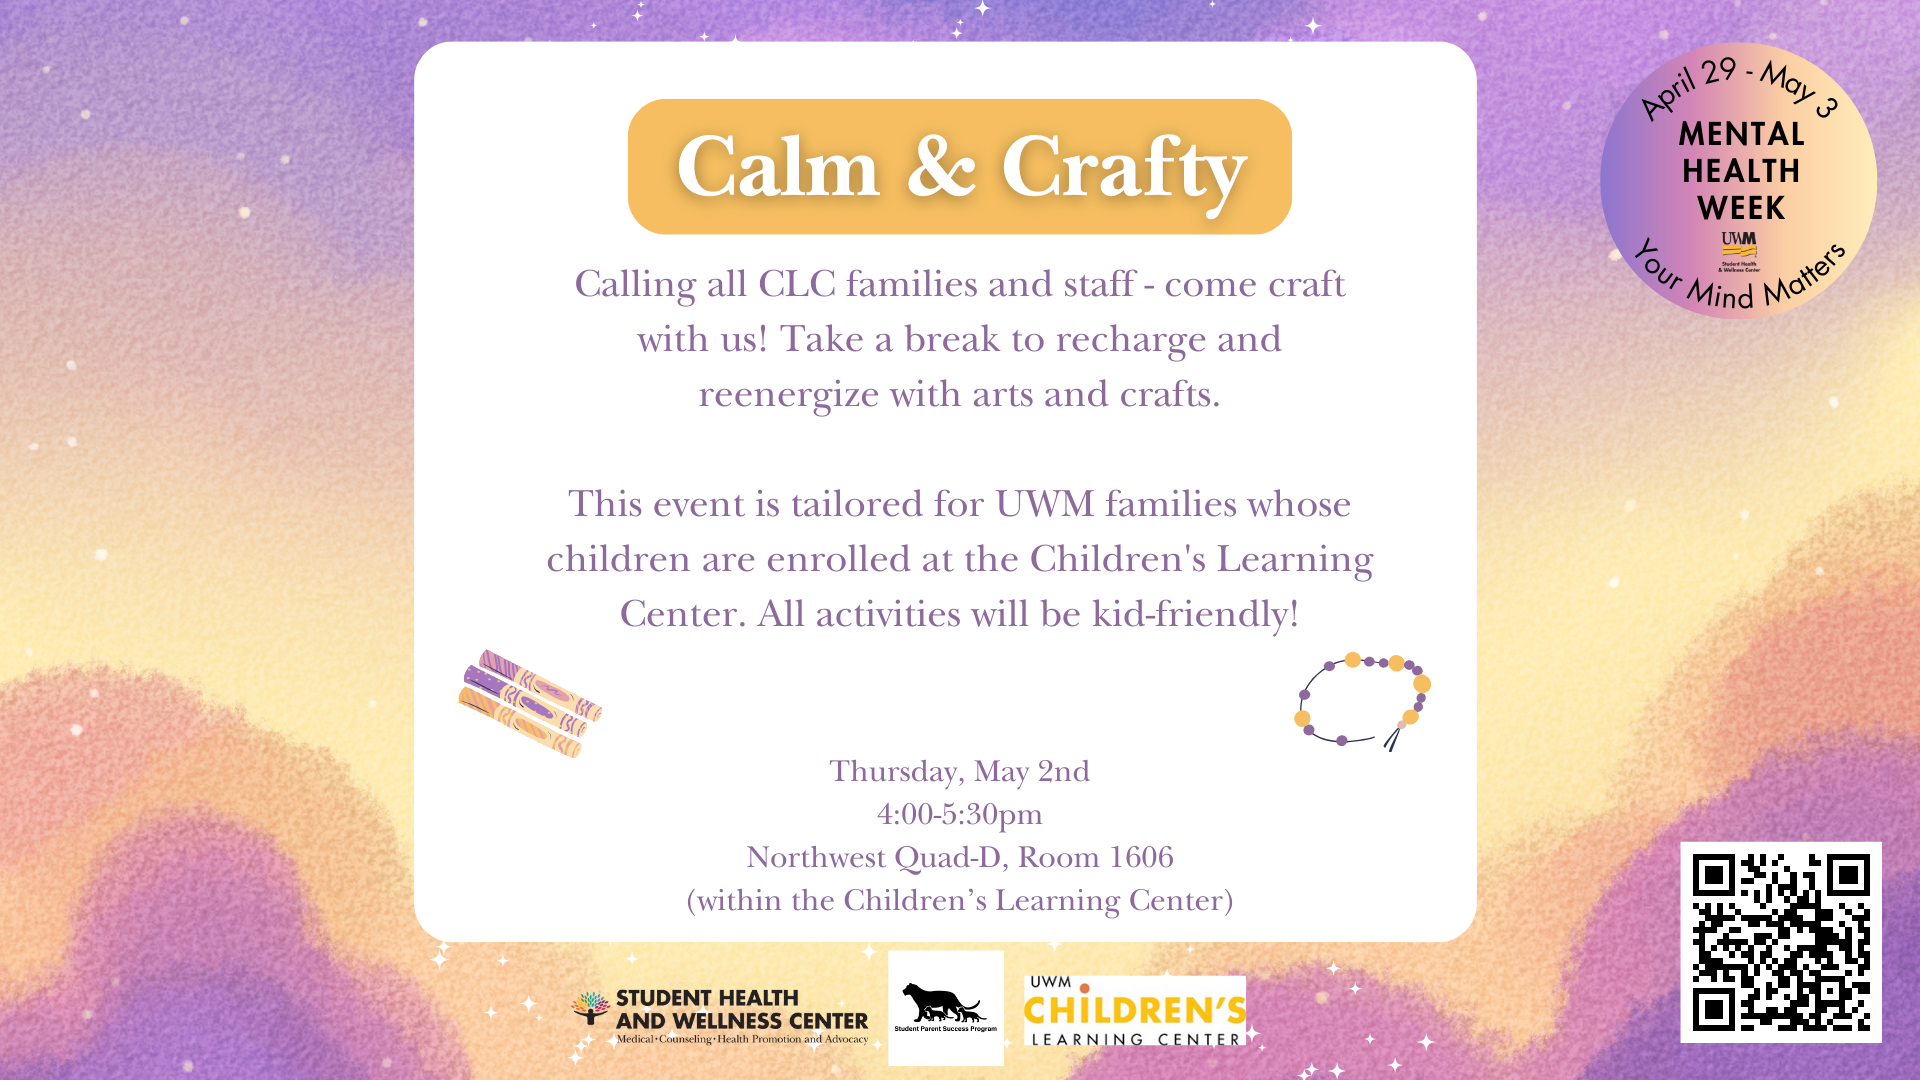 A graphic with information about an event where kids and parents can relax and make crafts.